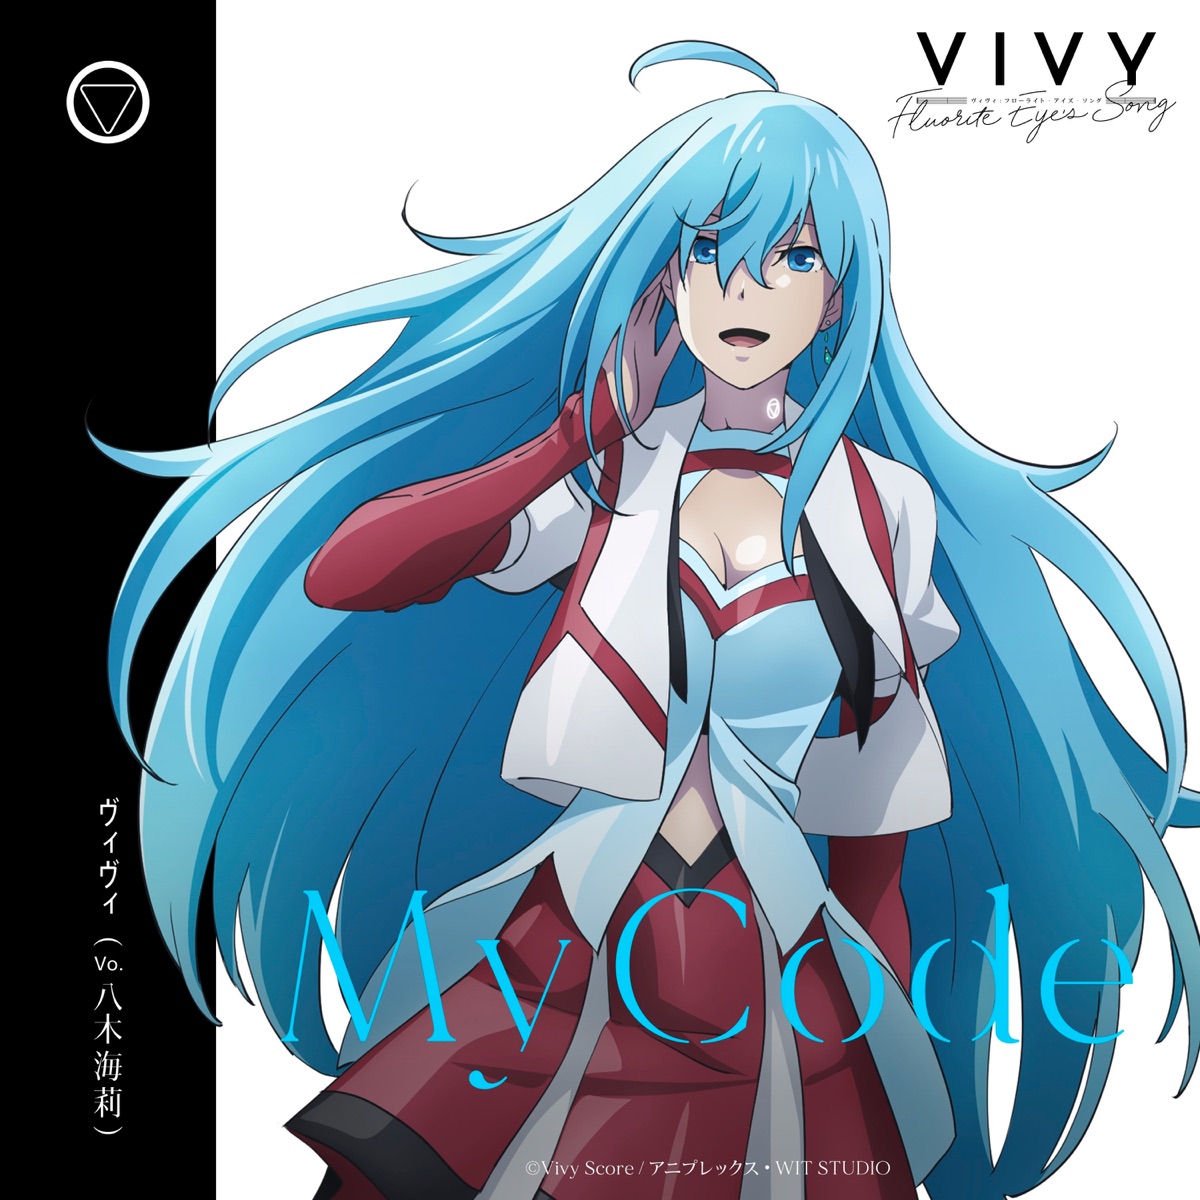 Cover art for『Vivy (Kairi Yagi) - My Code』from the release『My Code